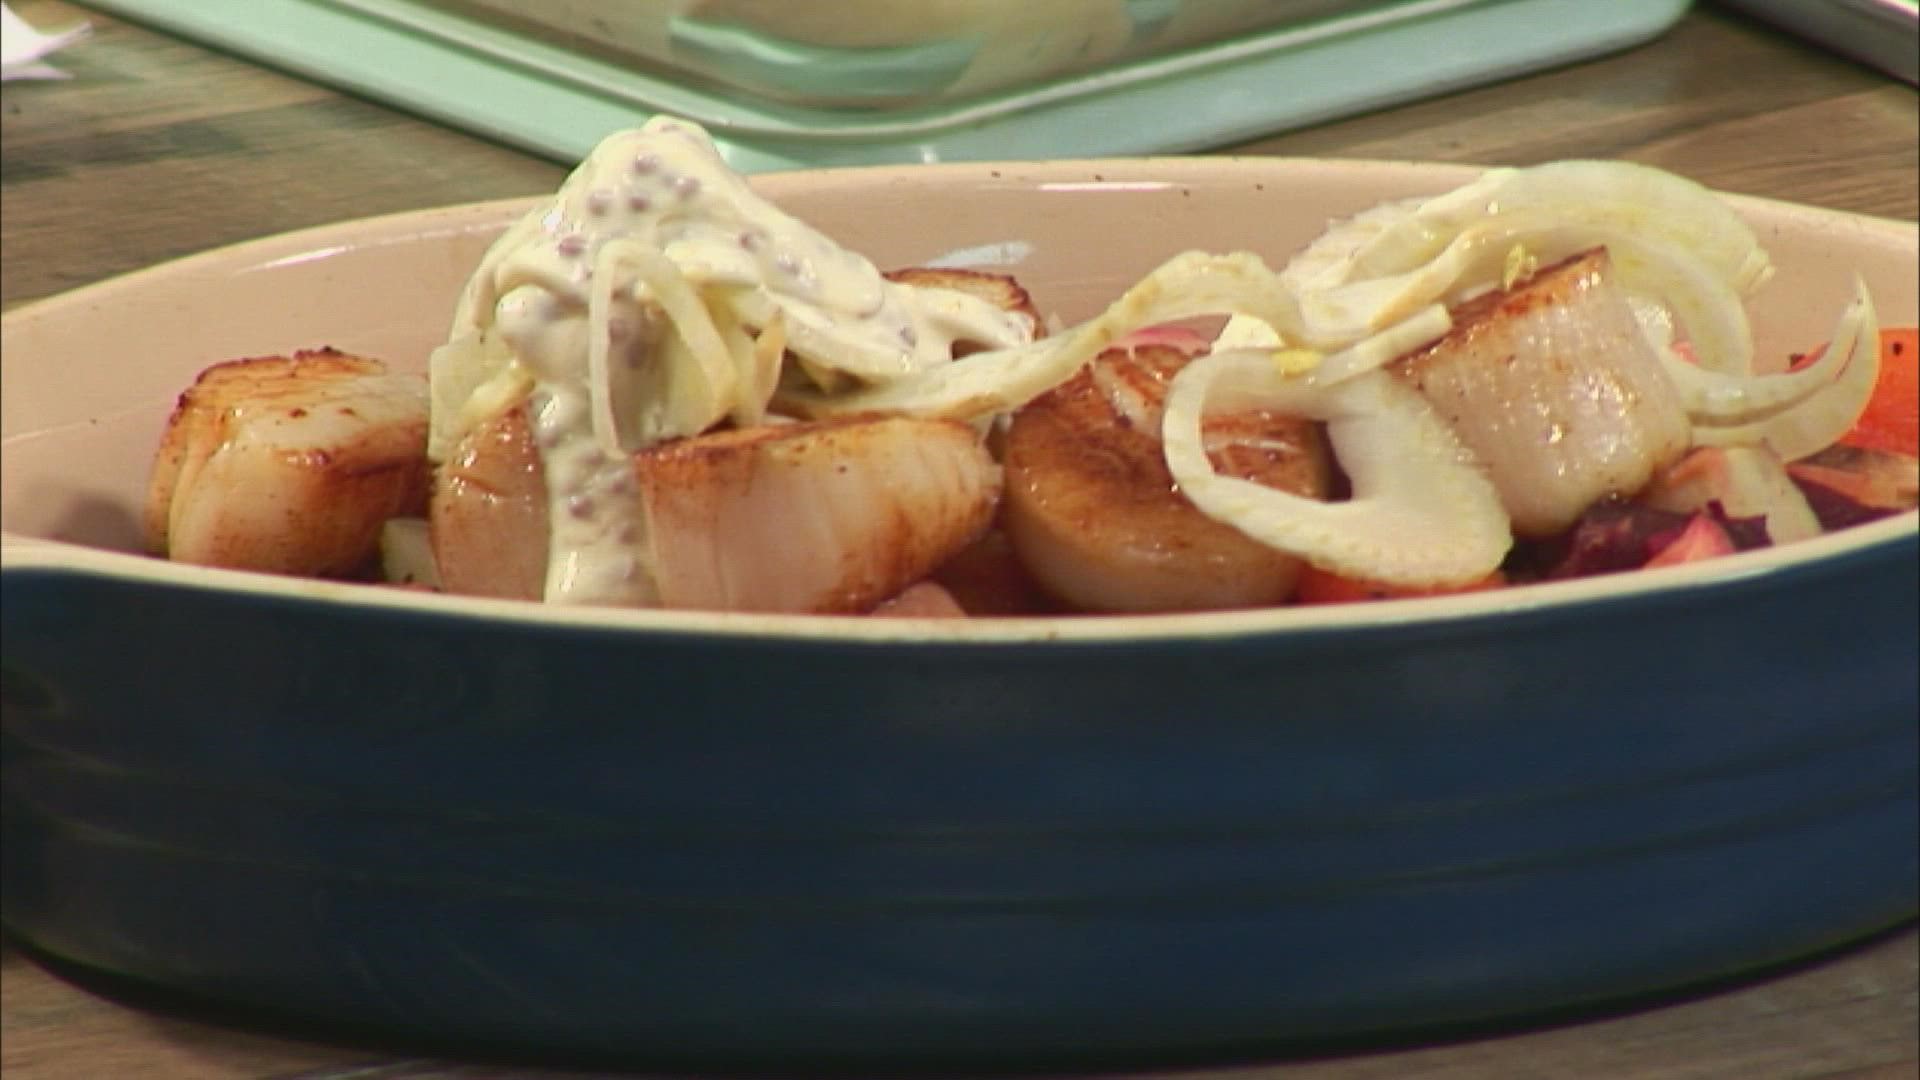 Monique Coombs from the Maine Coastal Fishermen’s Association shares a dish using fresh Maine seafood.